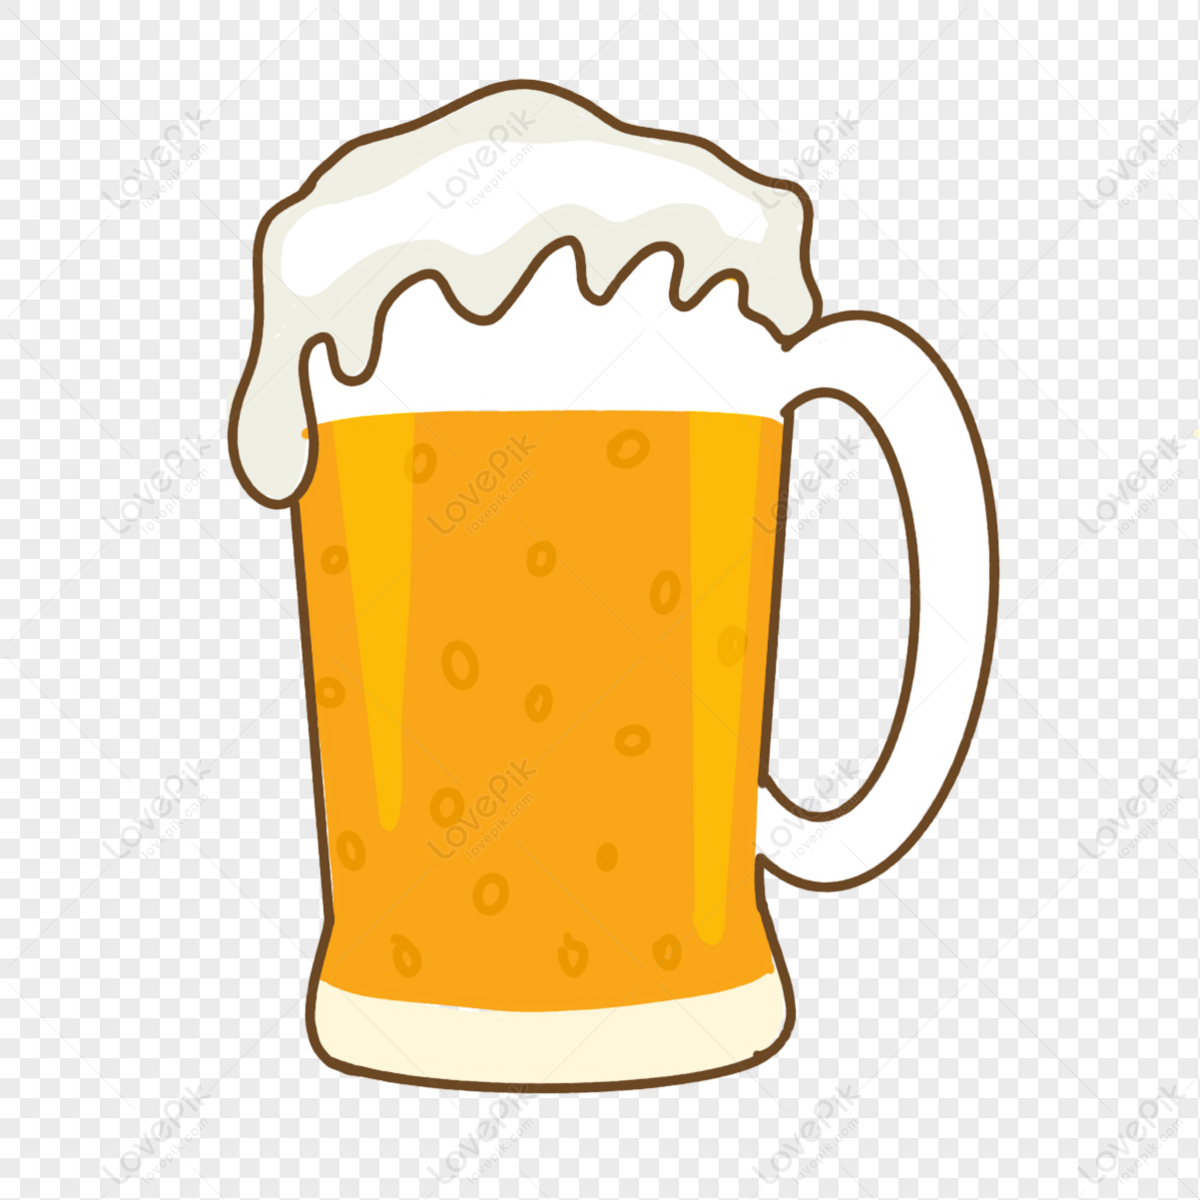 Foamy Beer Mug PNG Transparent Image And Clipart Image For Free Download -  Lovepik | 401164277